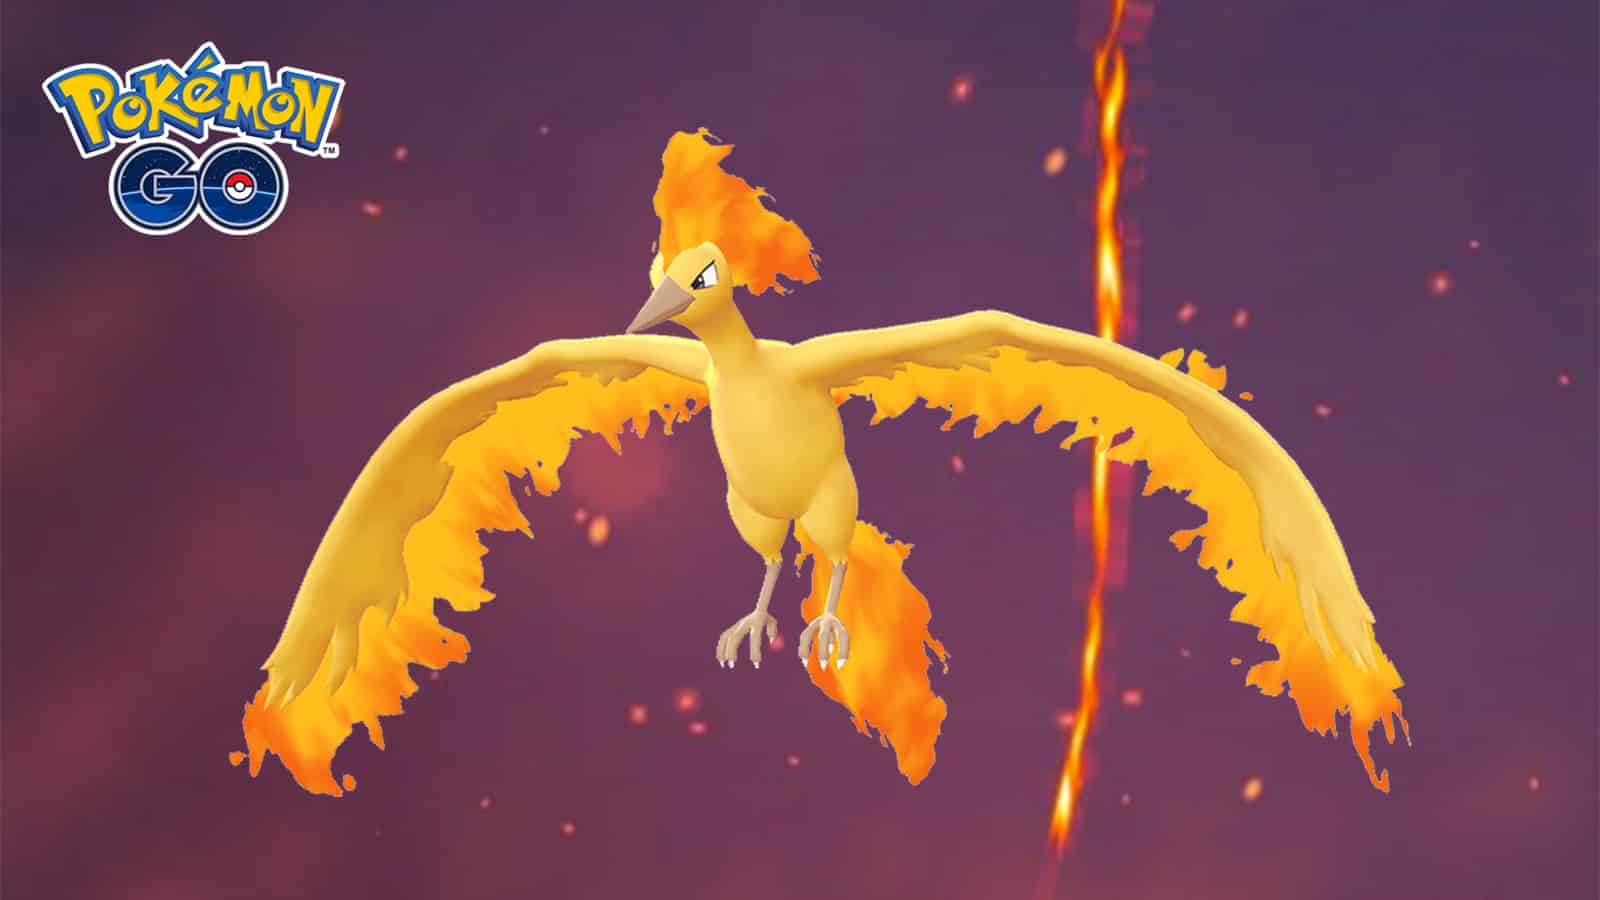 Moltres appearing with its best moveset in Pokemon Go